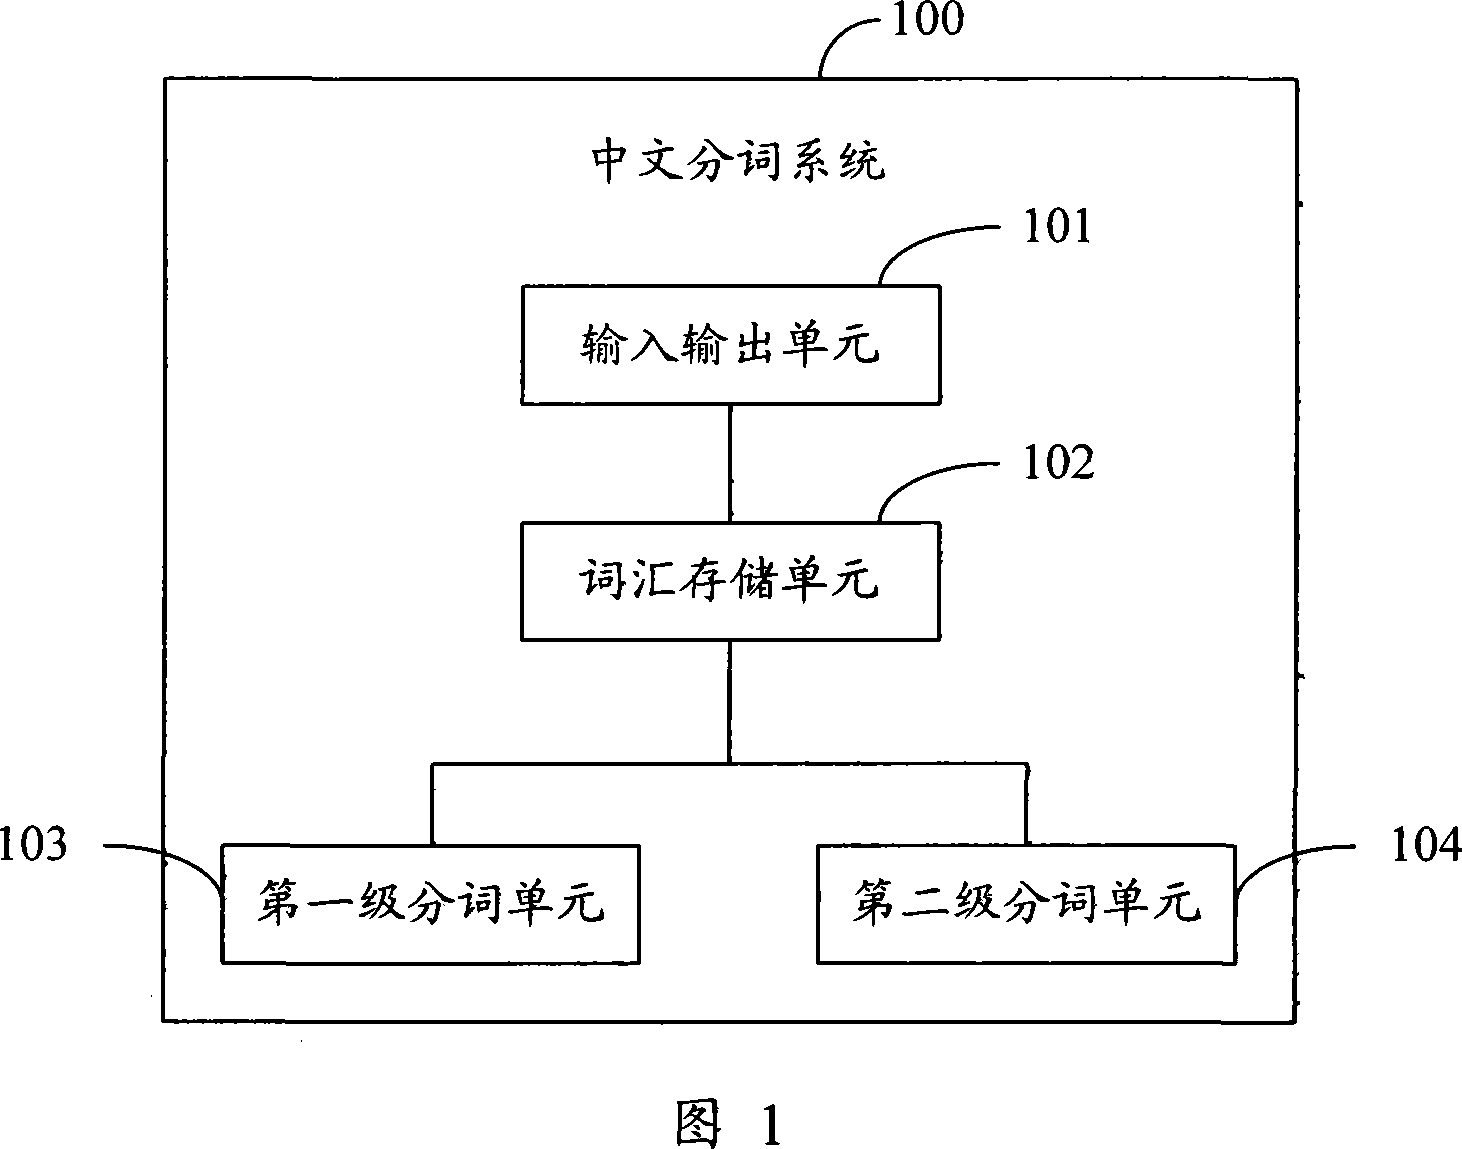 Chinese character word distinguishing method and system